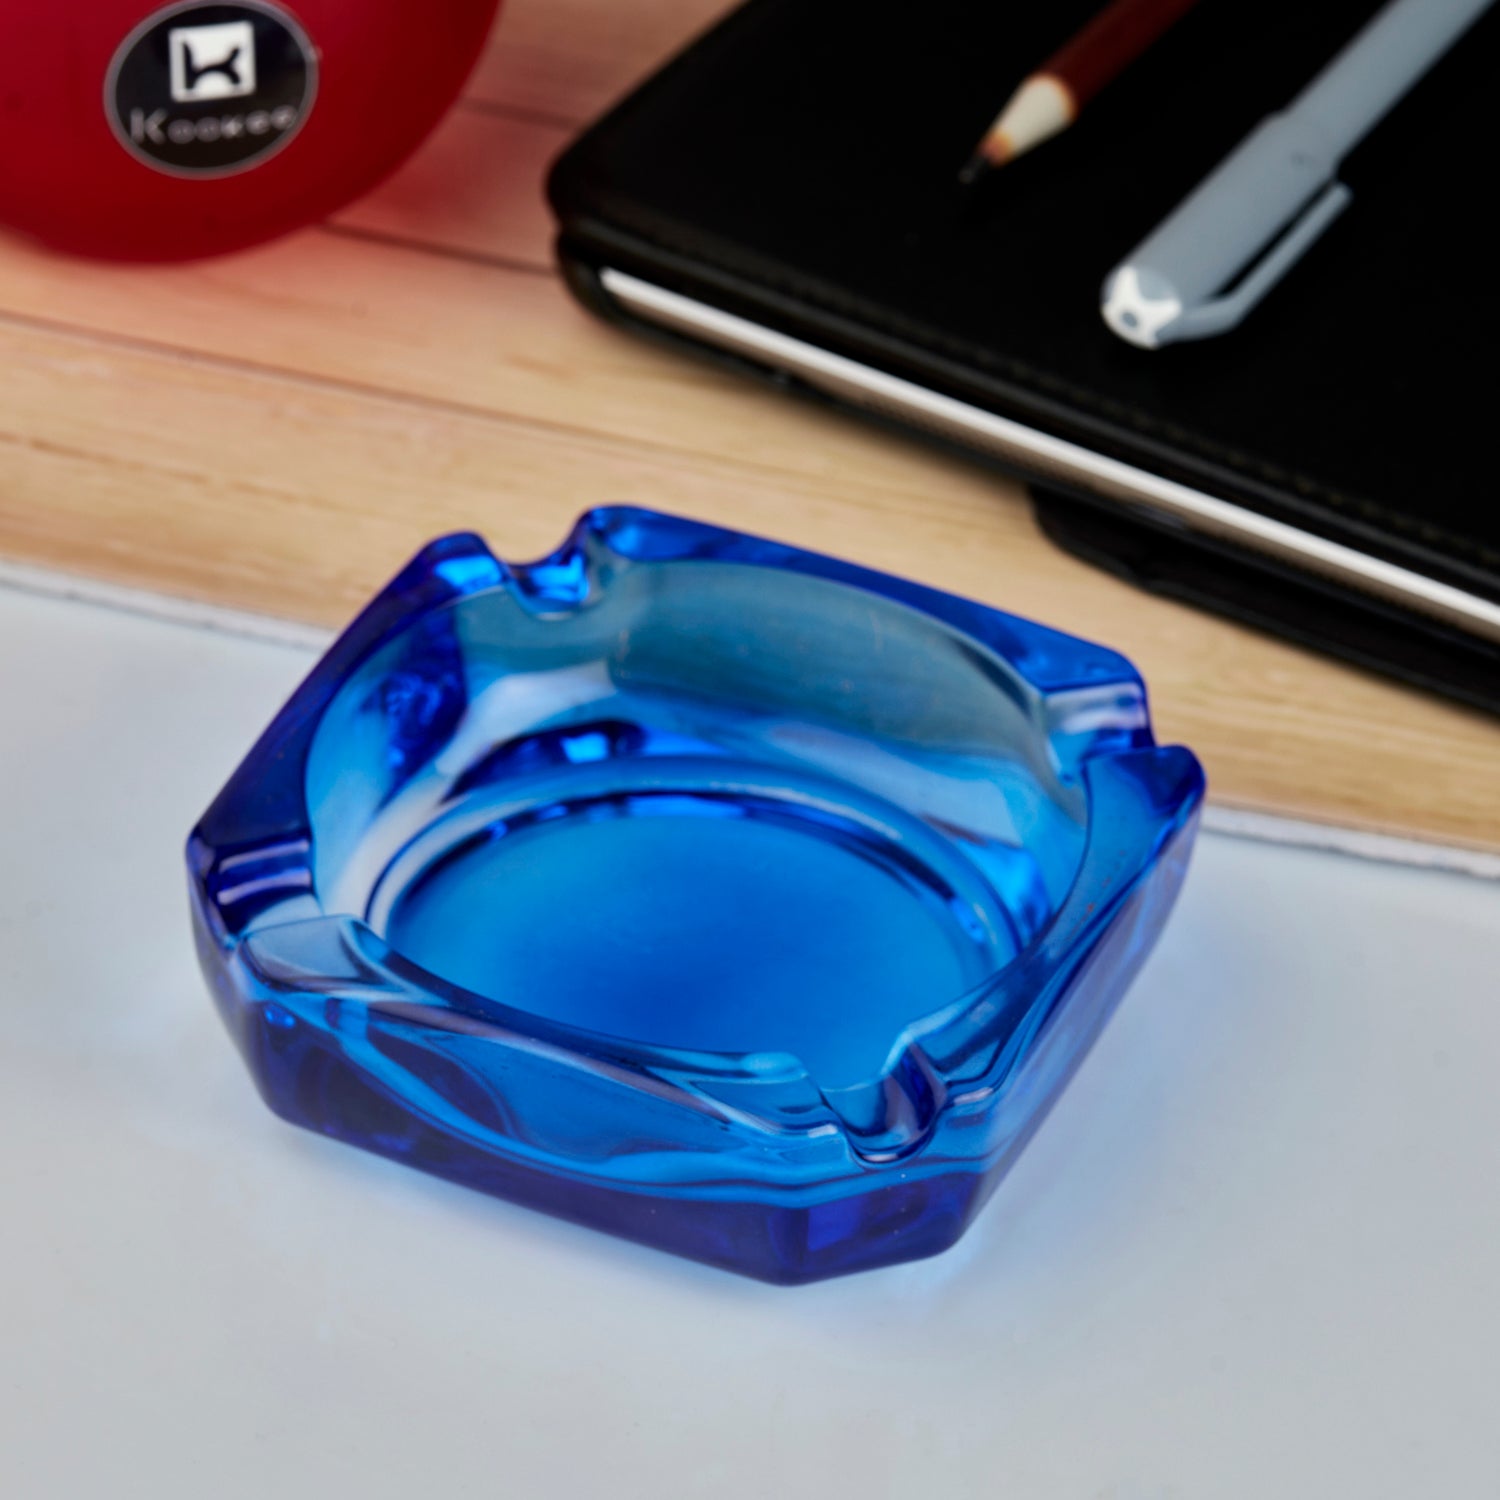 Kookee Glass Ashtray for Cigarettes, Tabletop Ashtray and Modern Decoration for Home Office Bar Restaurant Indoor Outdoor, Blue (10749)